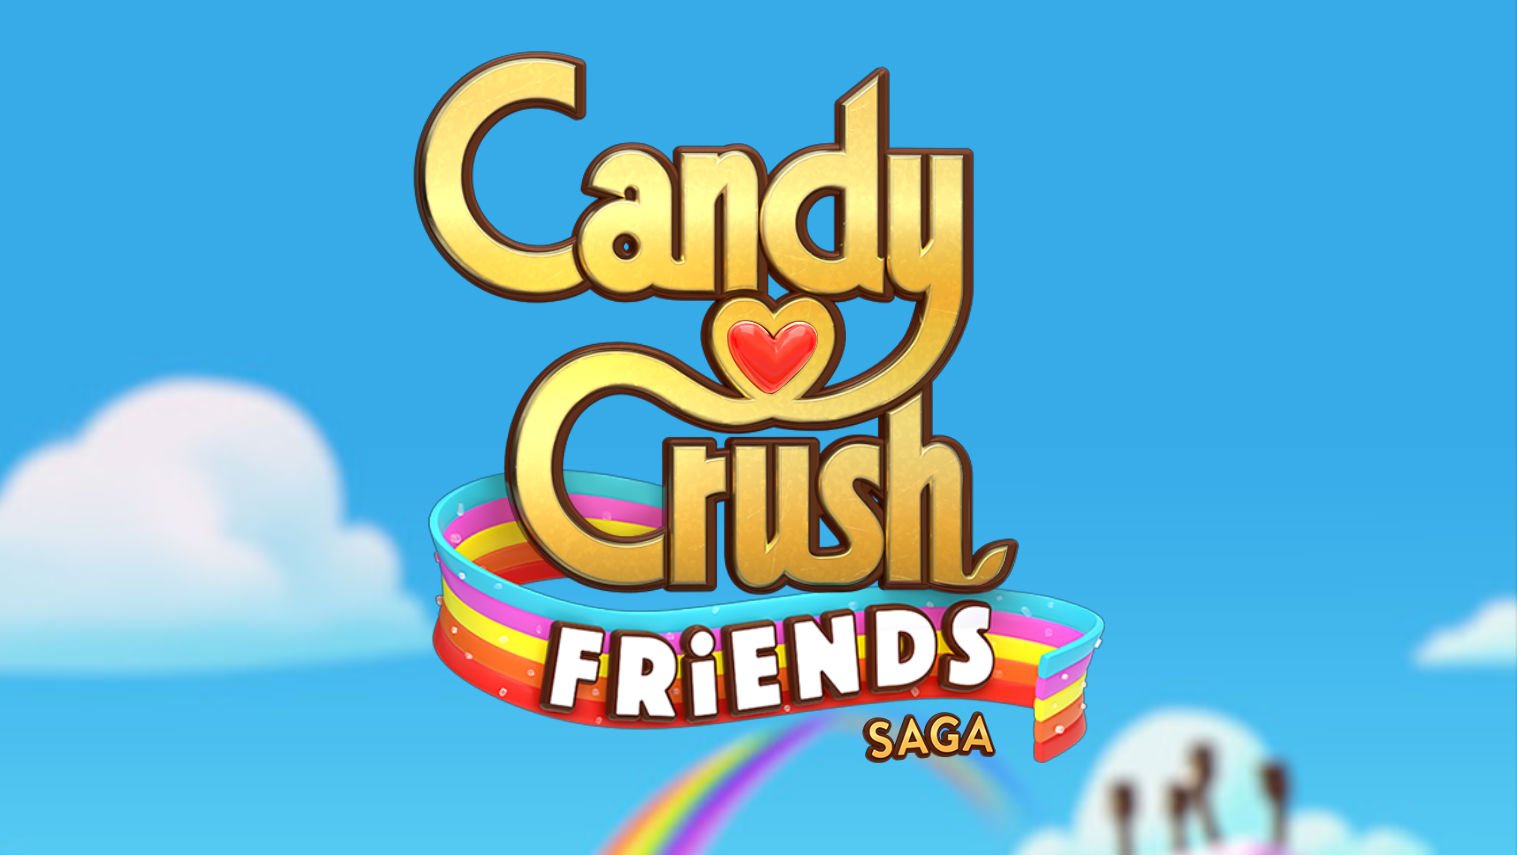 Candy Crush Friends Saga: How to Get Free Lives